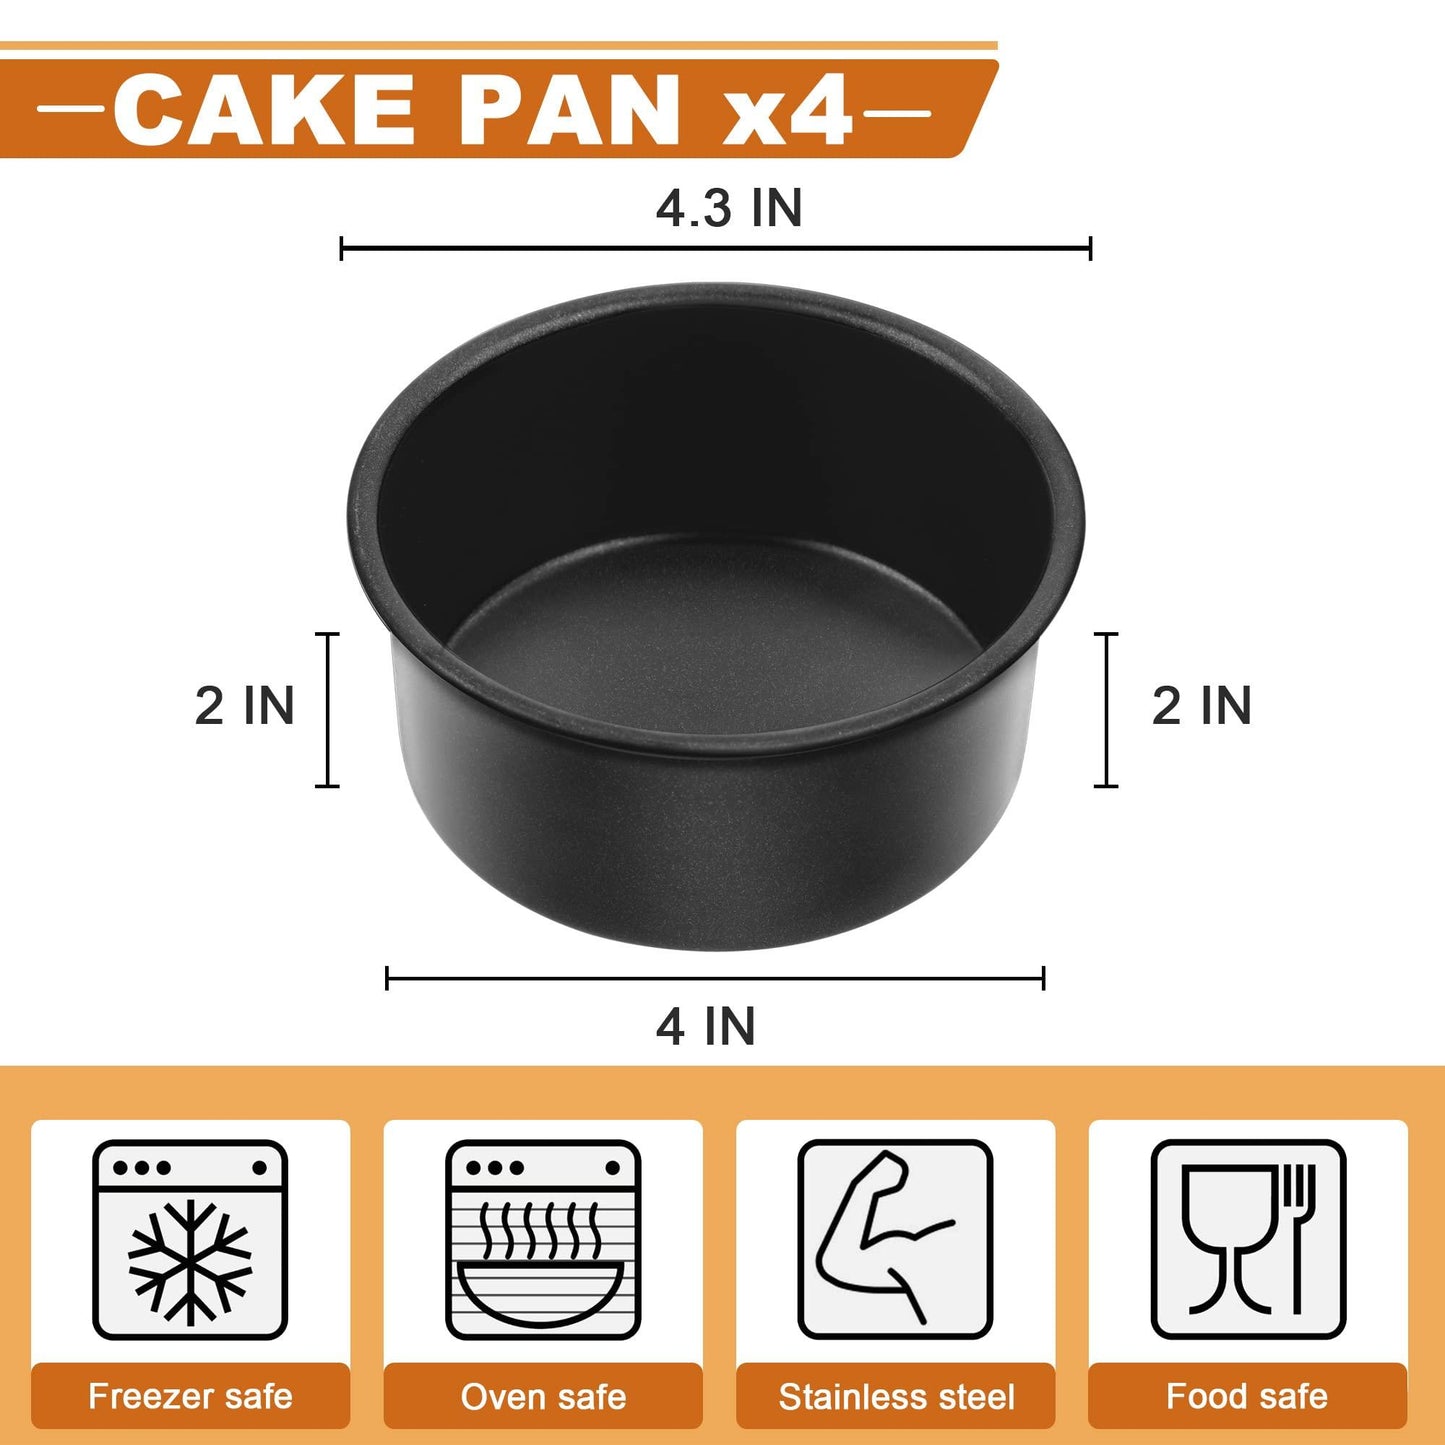 E-far 4 Inch Cake Pan, 4-Piece Nonstick Round Cake Baking Pans for Wedding, Birthday, Layer Cake, Stainless Steel Core & Non-Toxic Coating, 2 Inch Deep - CookCave